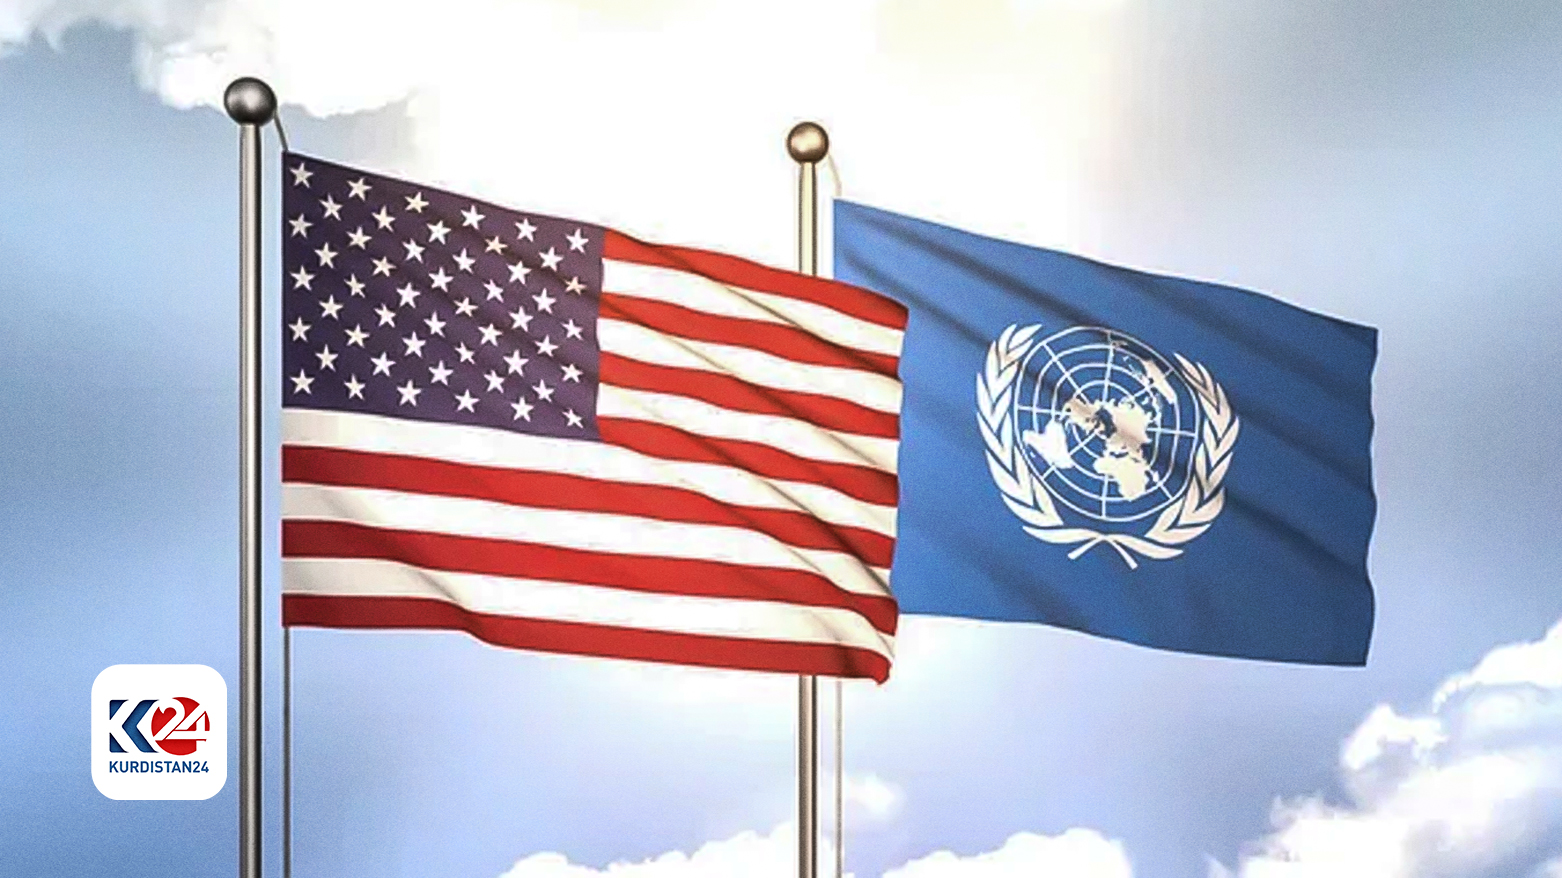 Flags of the United States of America and the United Nations. (Photo design by Kurdistan 24)